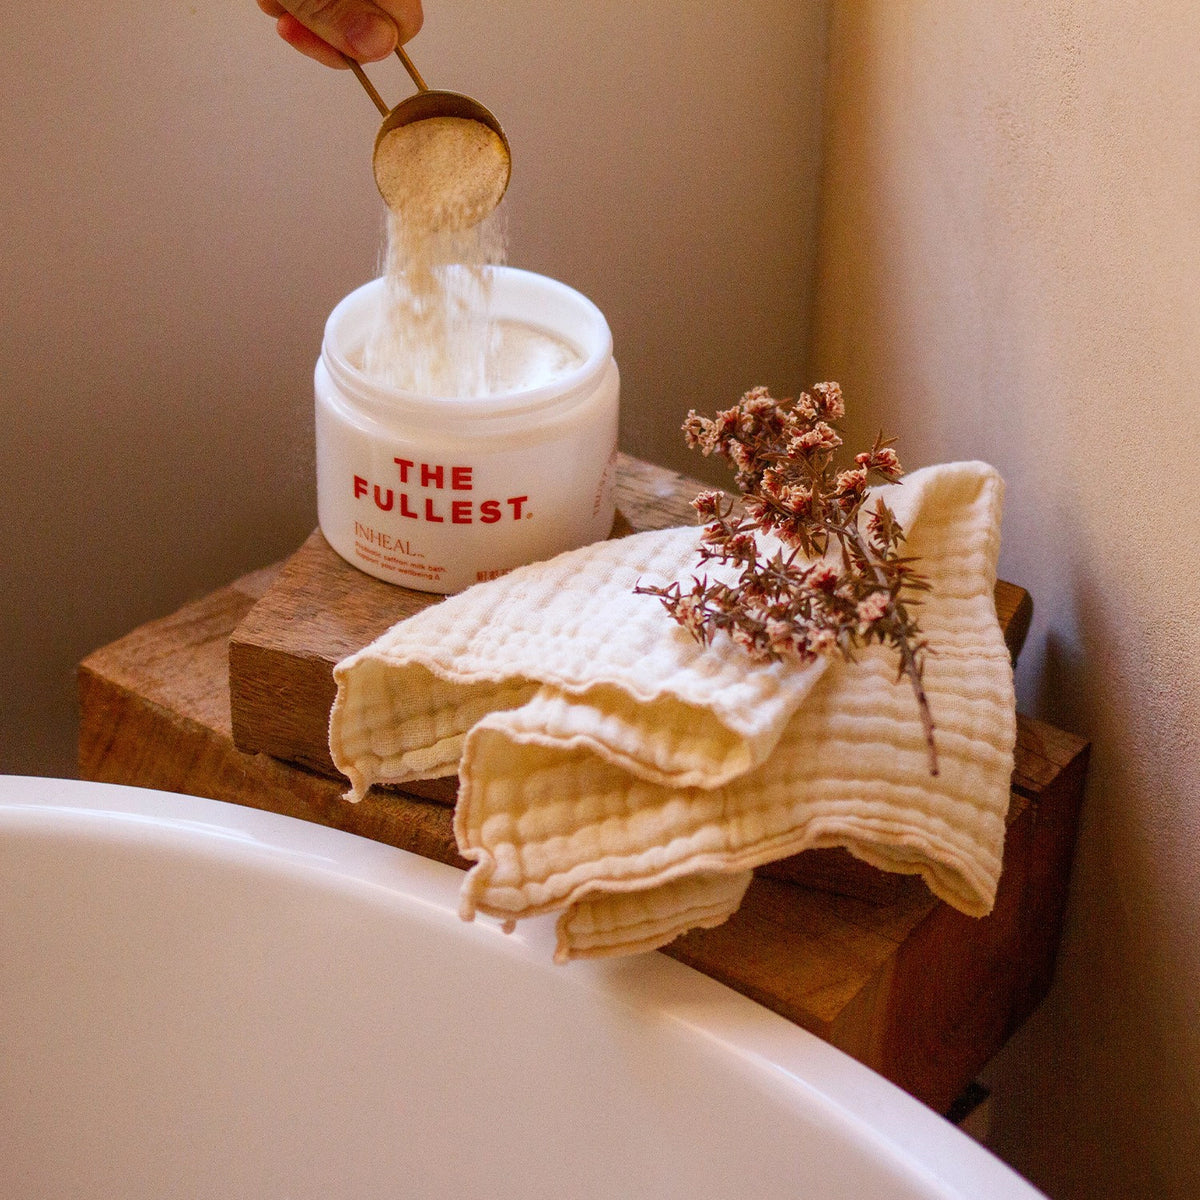 A hand scooping a white powder from a container labeled &quot;Inheal saffron milk bath&quot; next to a cloth and dried flowers on a wooden stool beside a bathtub.